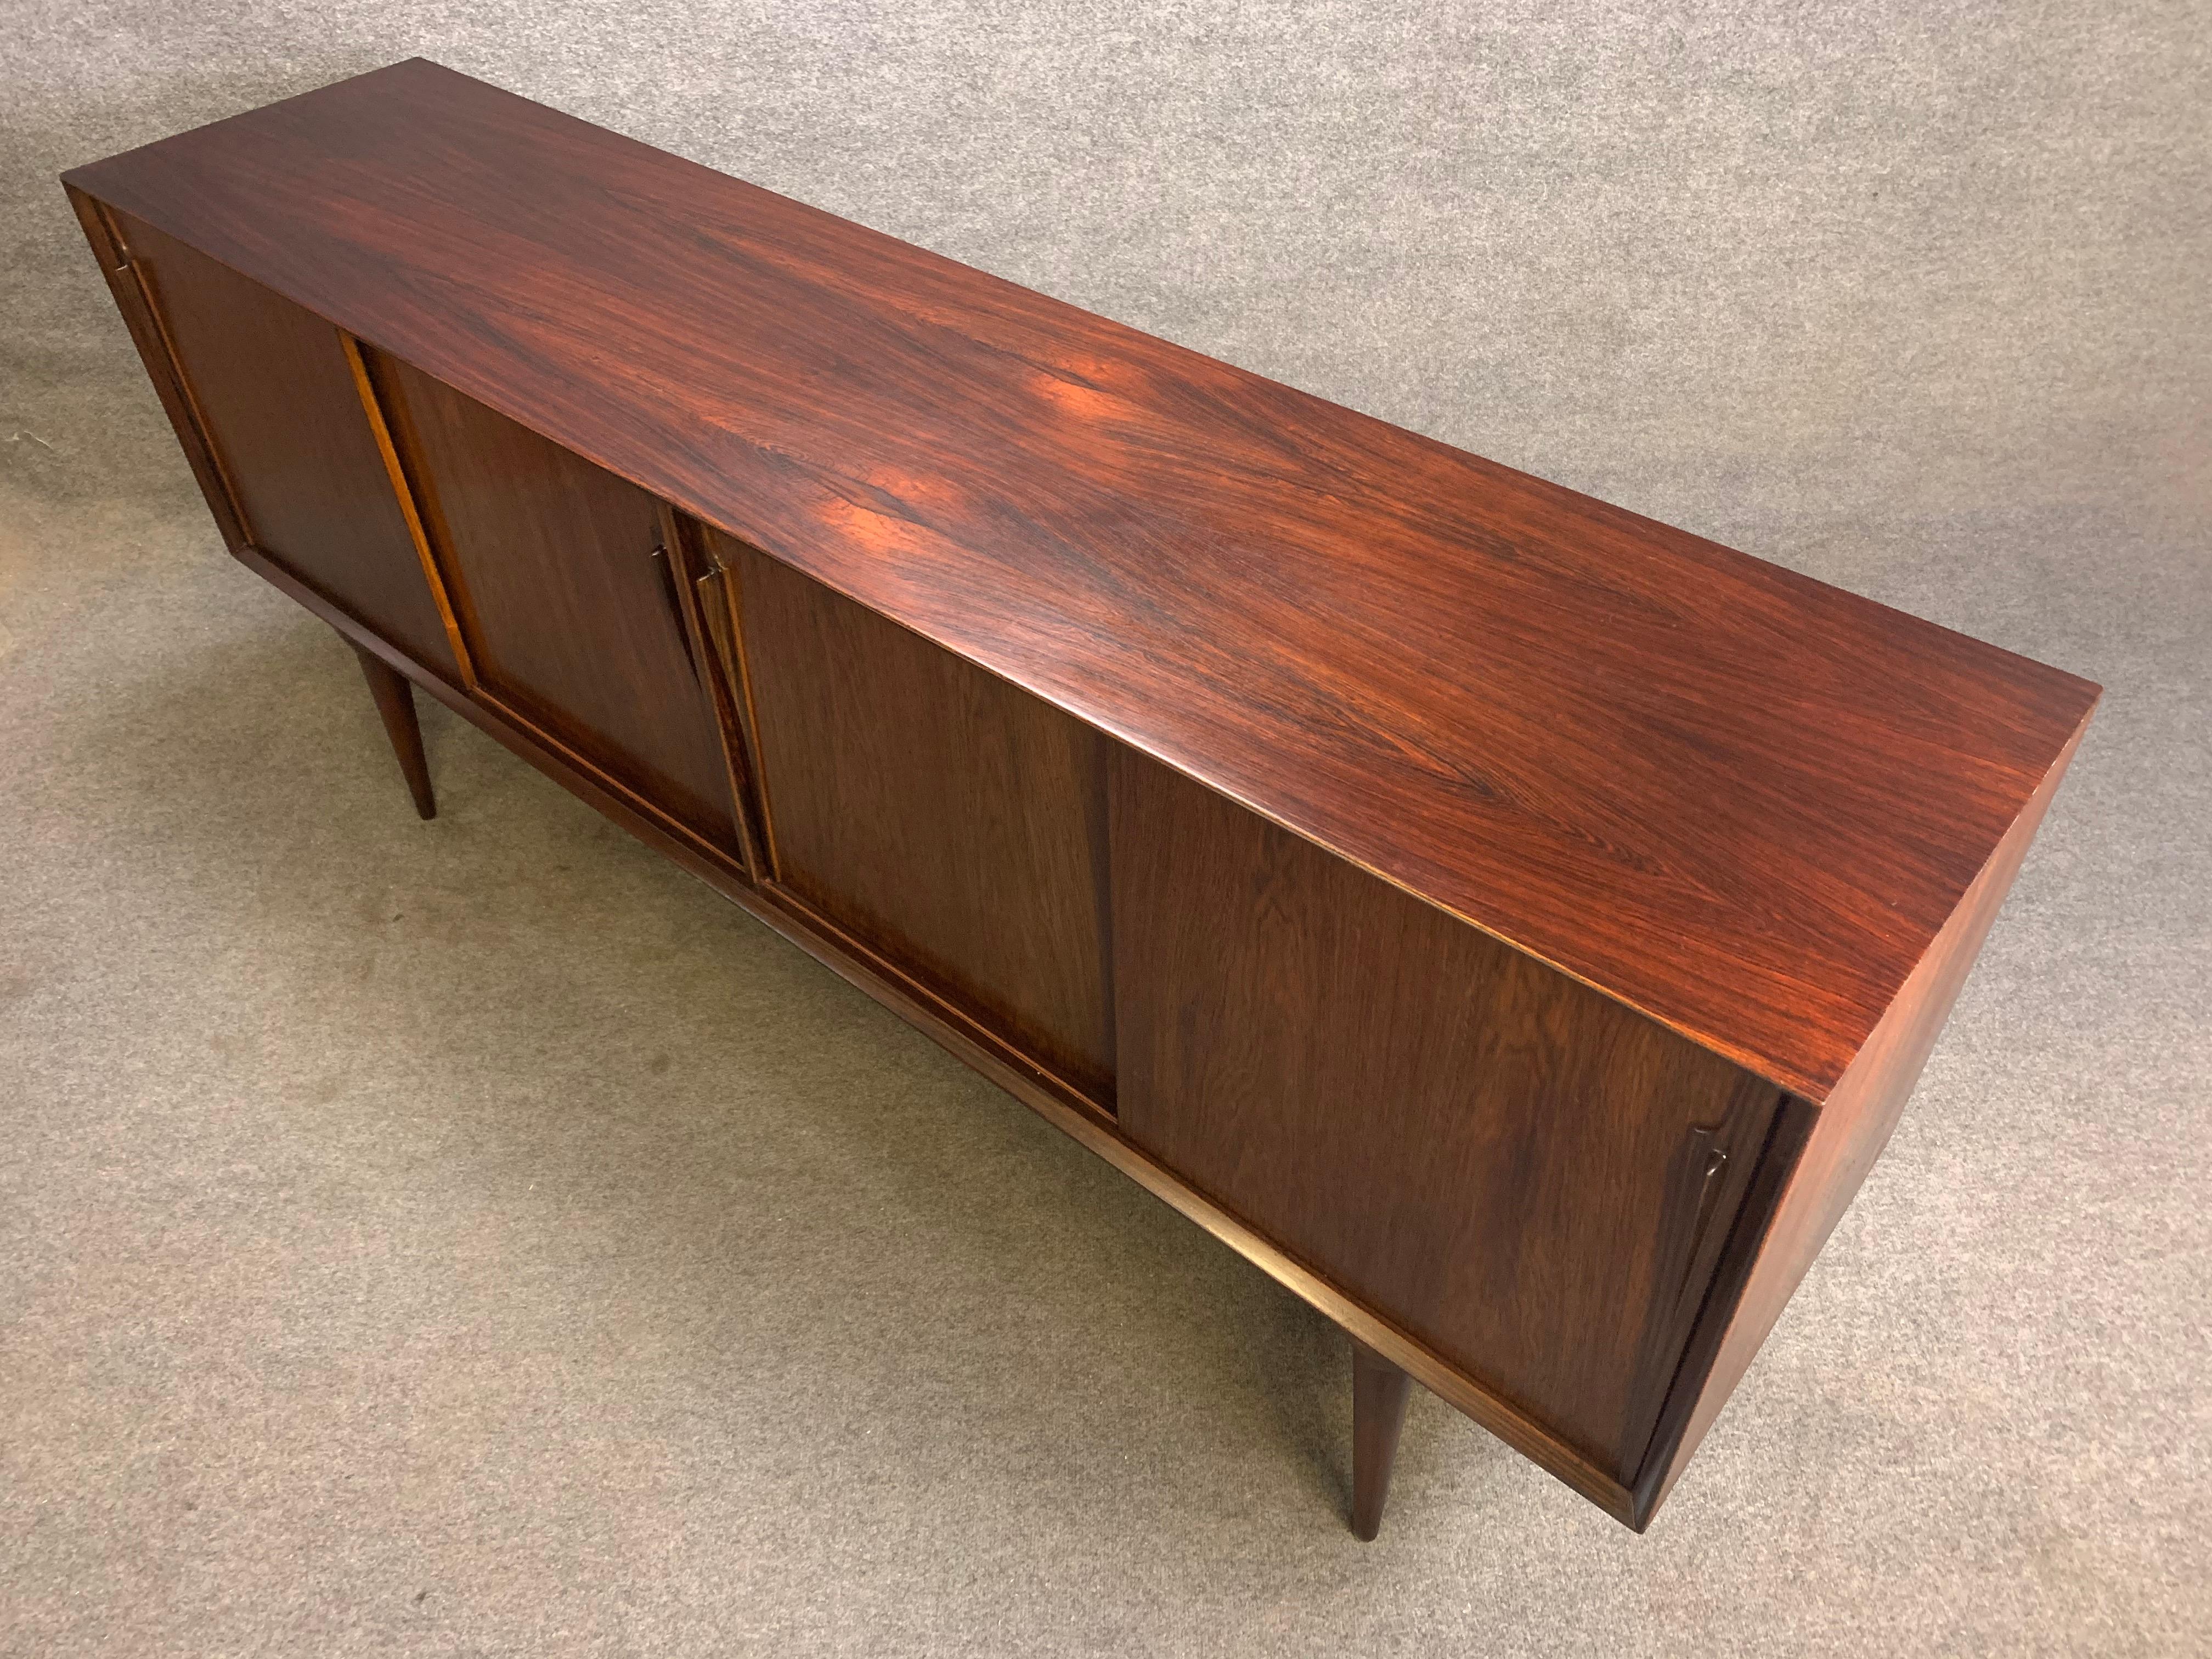 Here's a rare Scandinavian Modern sideboard in rosewood designed by Gunni Omann for Omann Jun Mobelfabrik in Denmark in the 1960s.
This superb credenza features a vibrant wood grain and four sliding doors revealing multiple adjustable shelvings and